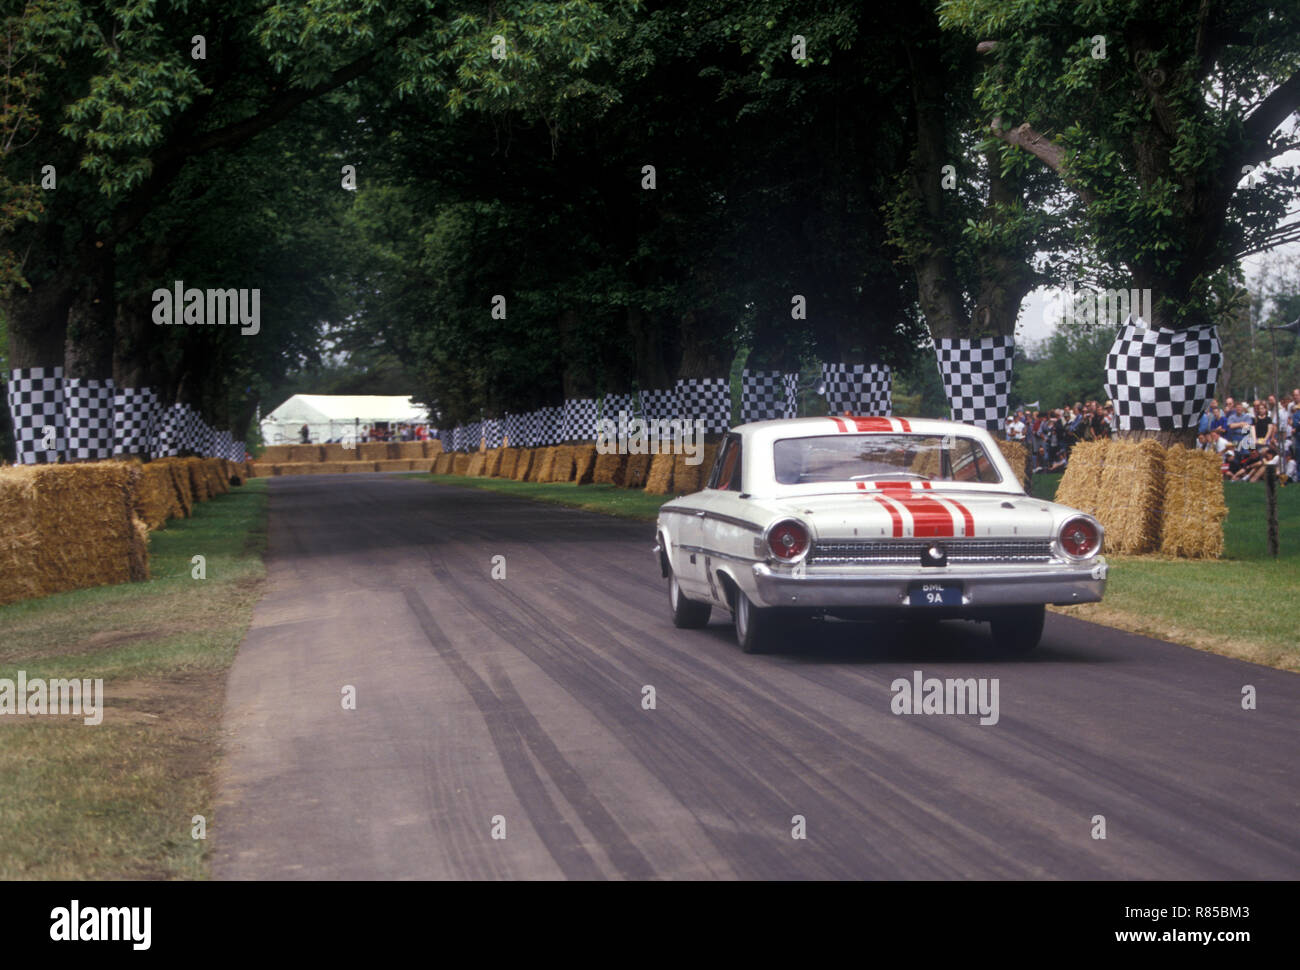 Ford Galaxie racing car at the Goodwood Festival of Speed 1996 Stock Photo